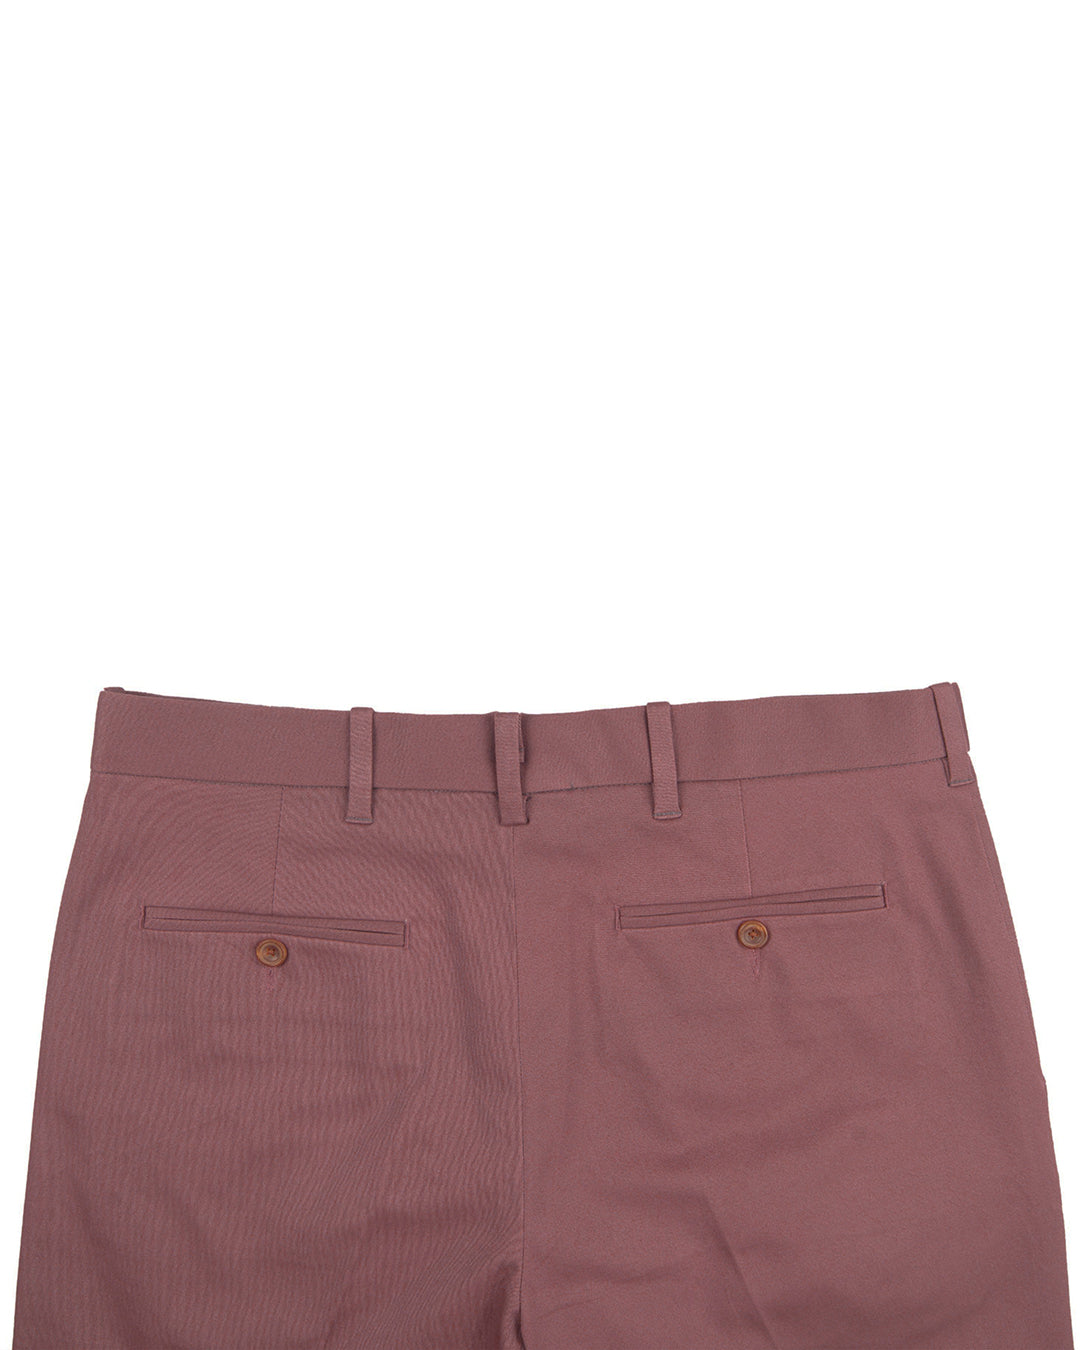 DK Salmon Pink 4-Way Stretchable Soft Chinos